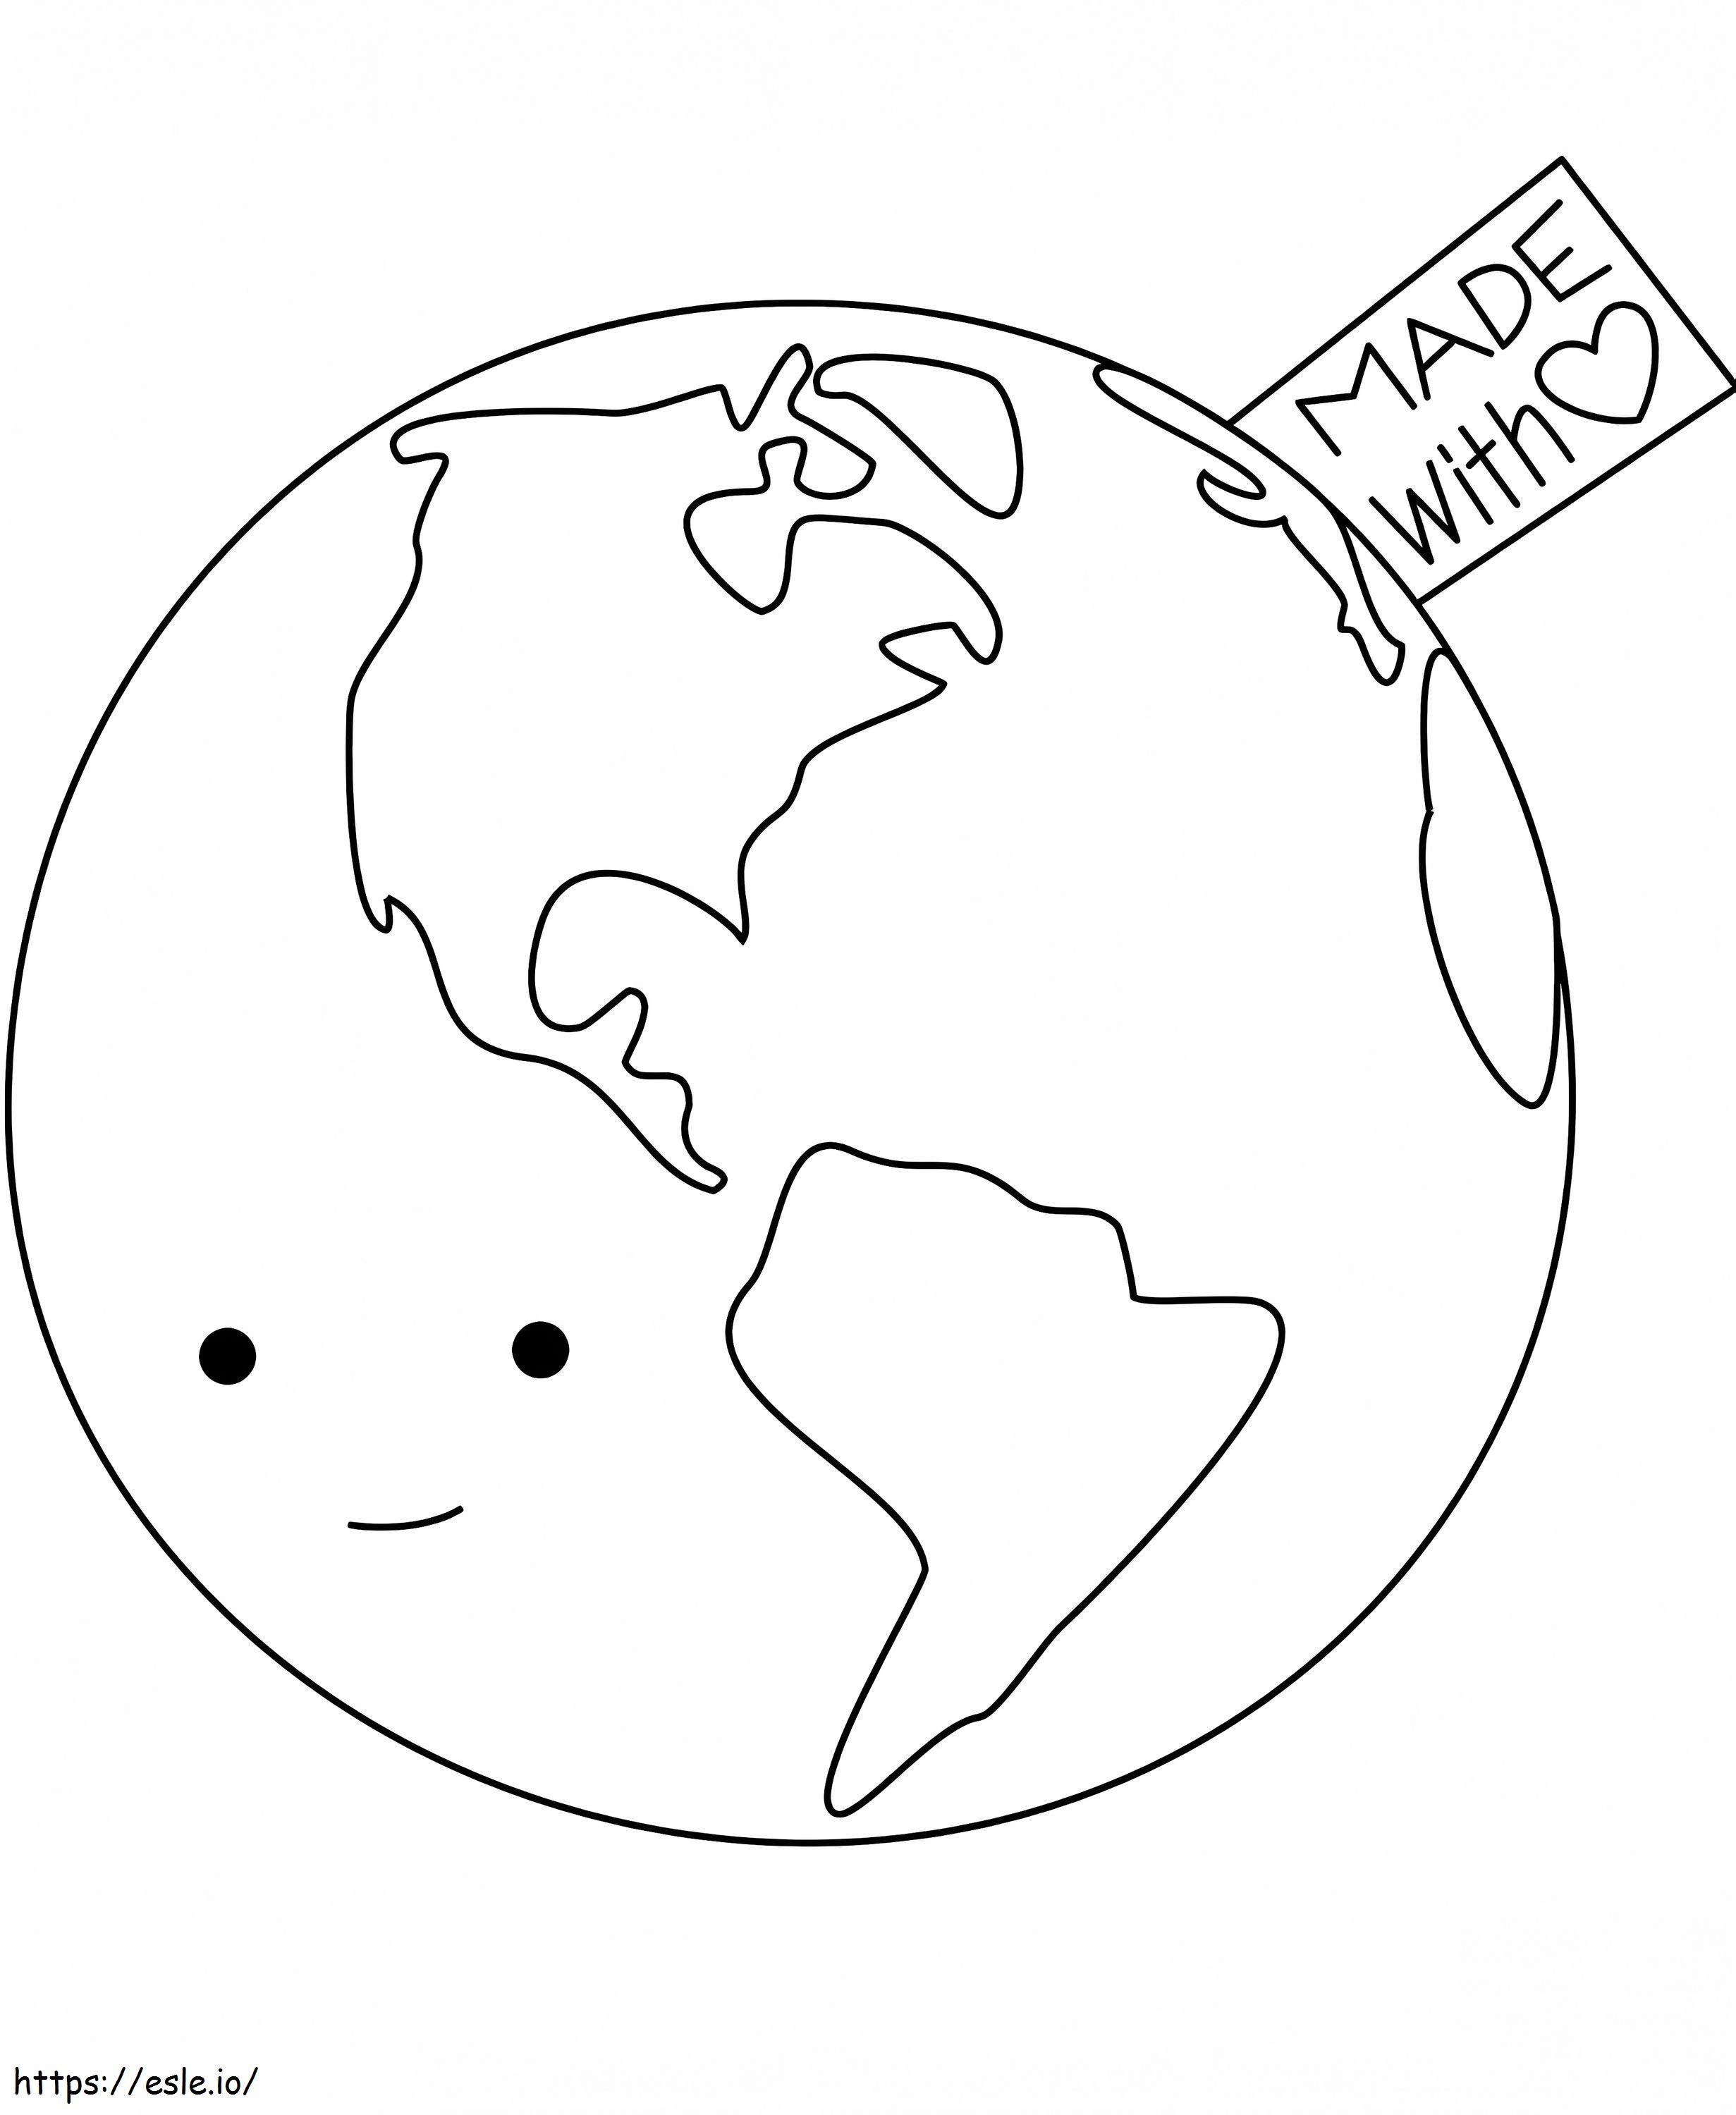 Earth Made With Love coloring page